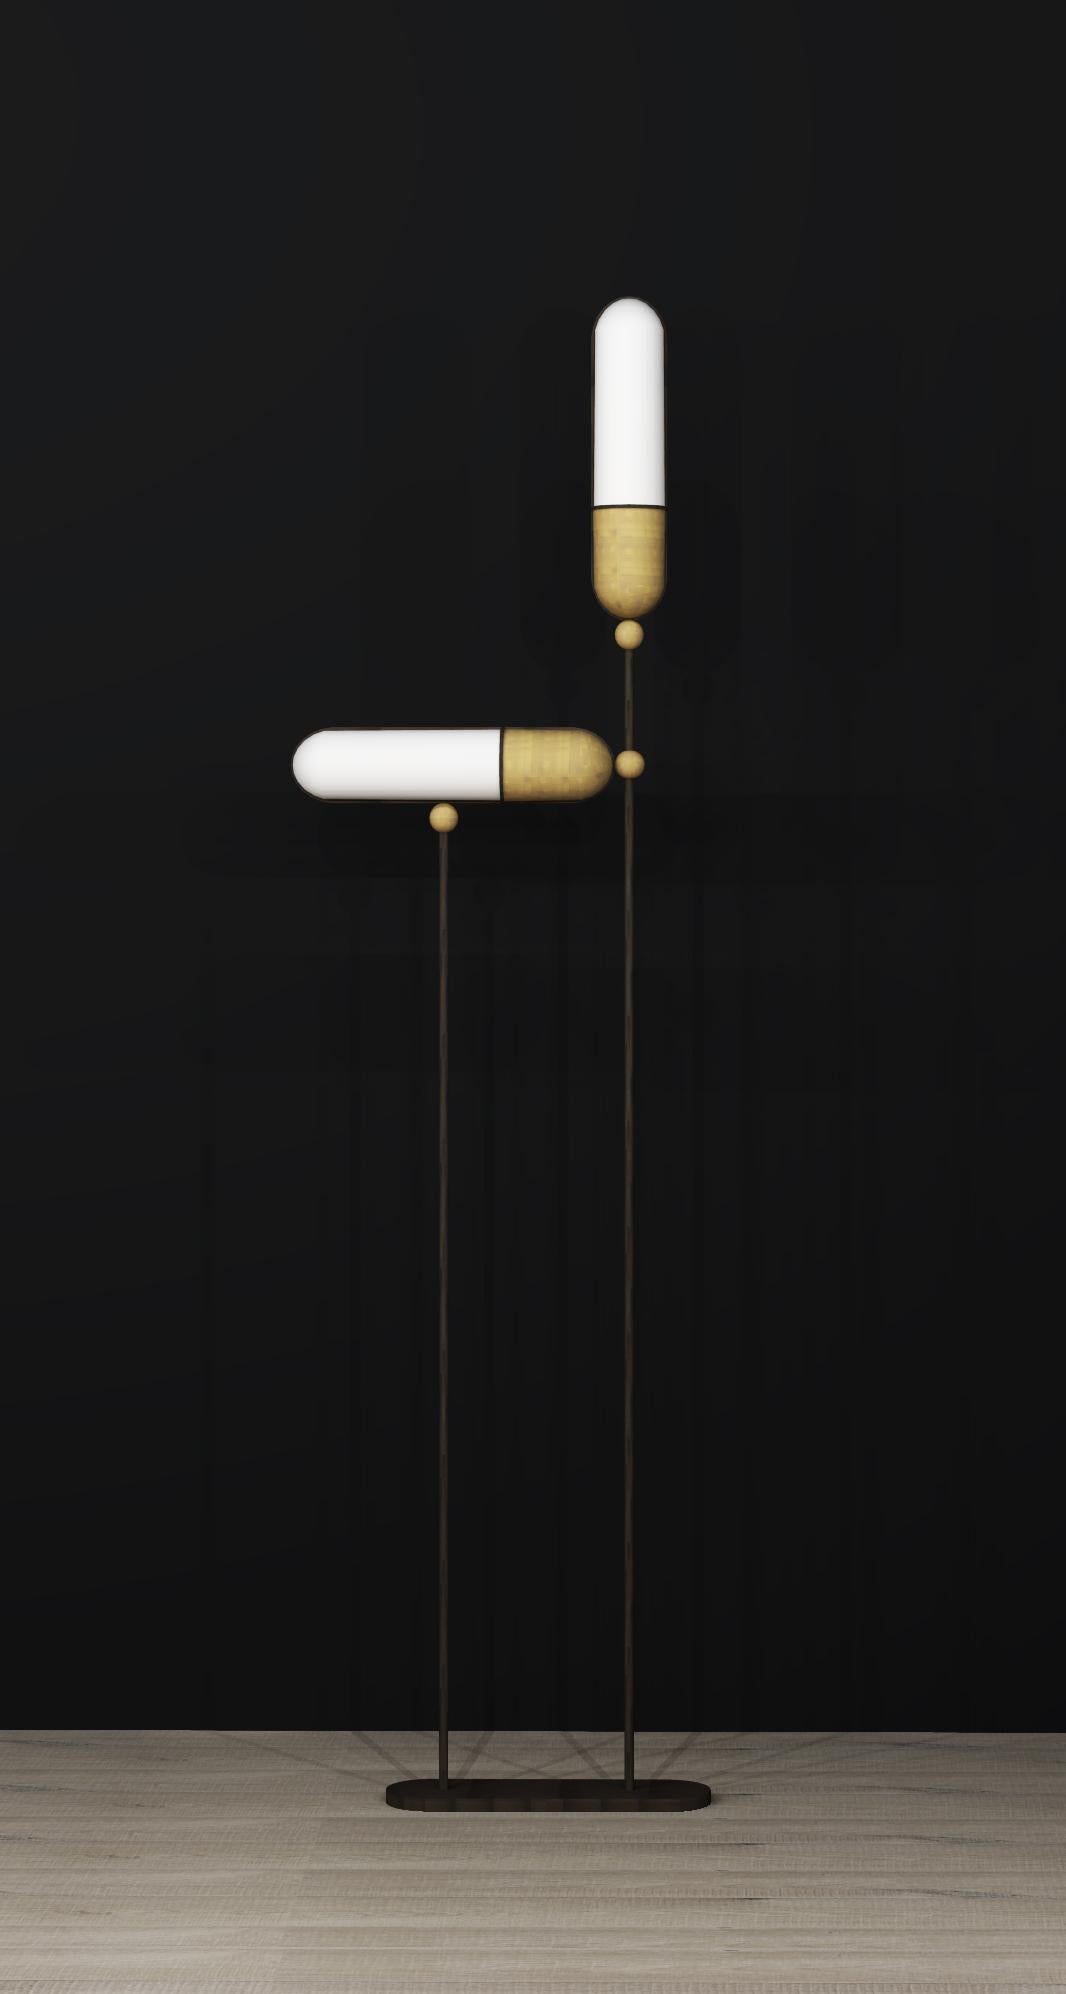 Inspiration for this floor lamp is taken from “The Century Building” Lobby in New York. This collection is crafted from vertical rounded linear bronze frame with glass and brass shade insert to either sides. Sleek and elegant antique bronze and